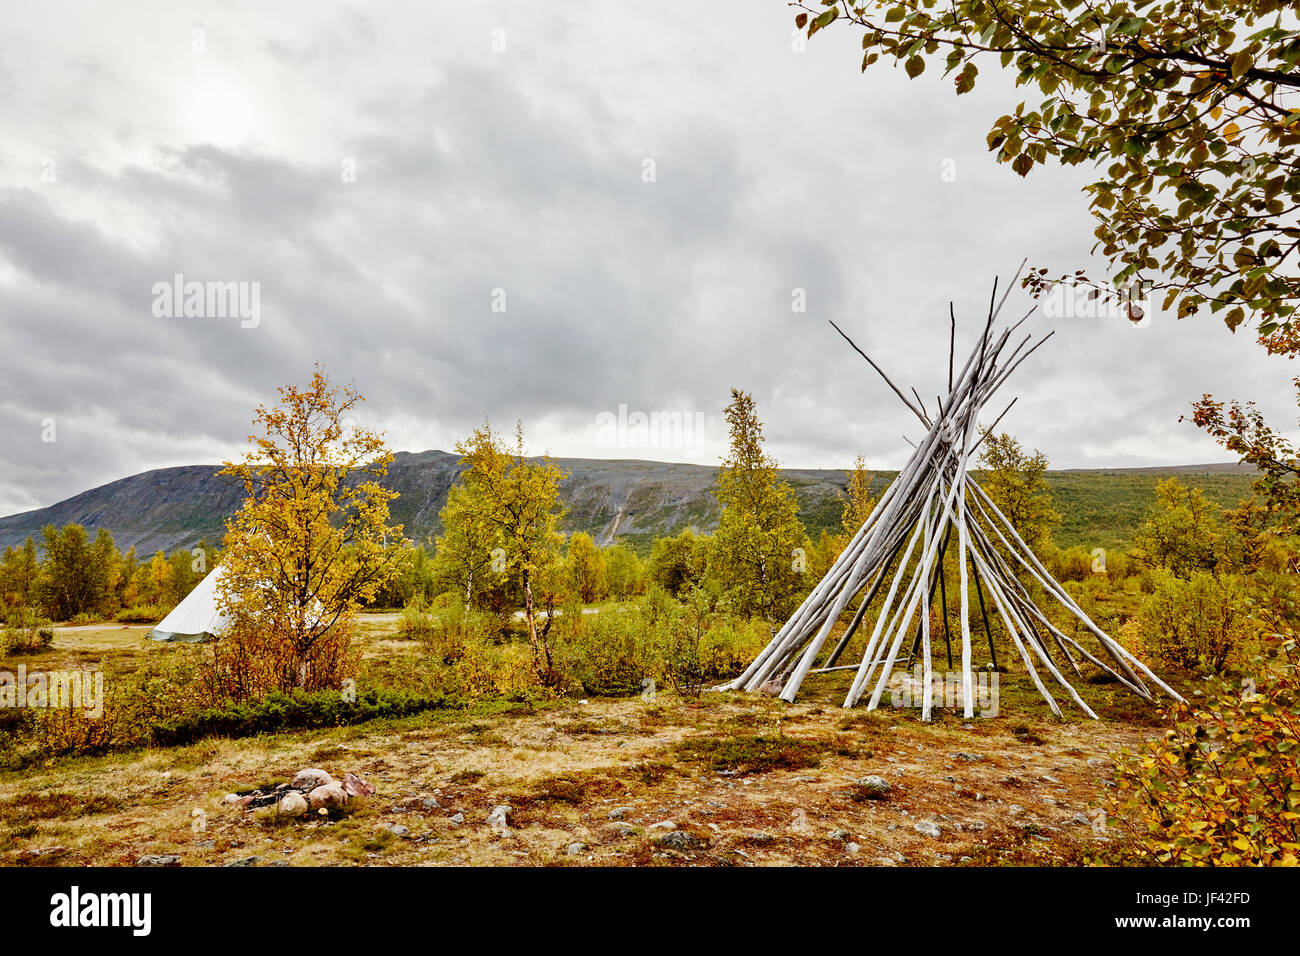 Autumn landscape with teepee-shaped log structure in foreground Stock Photo